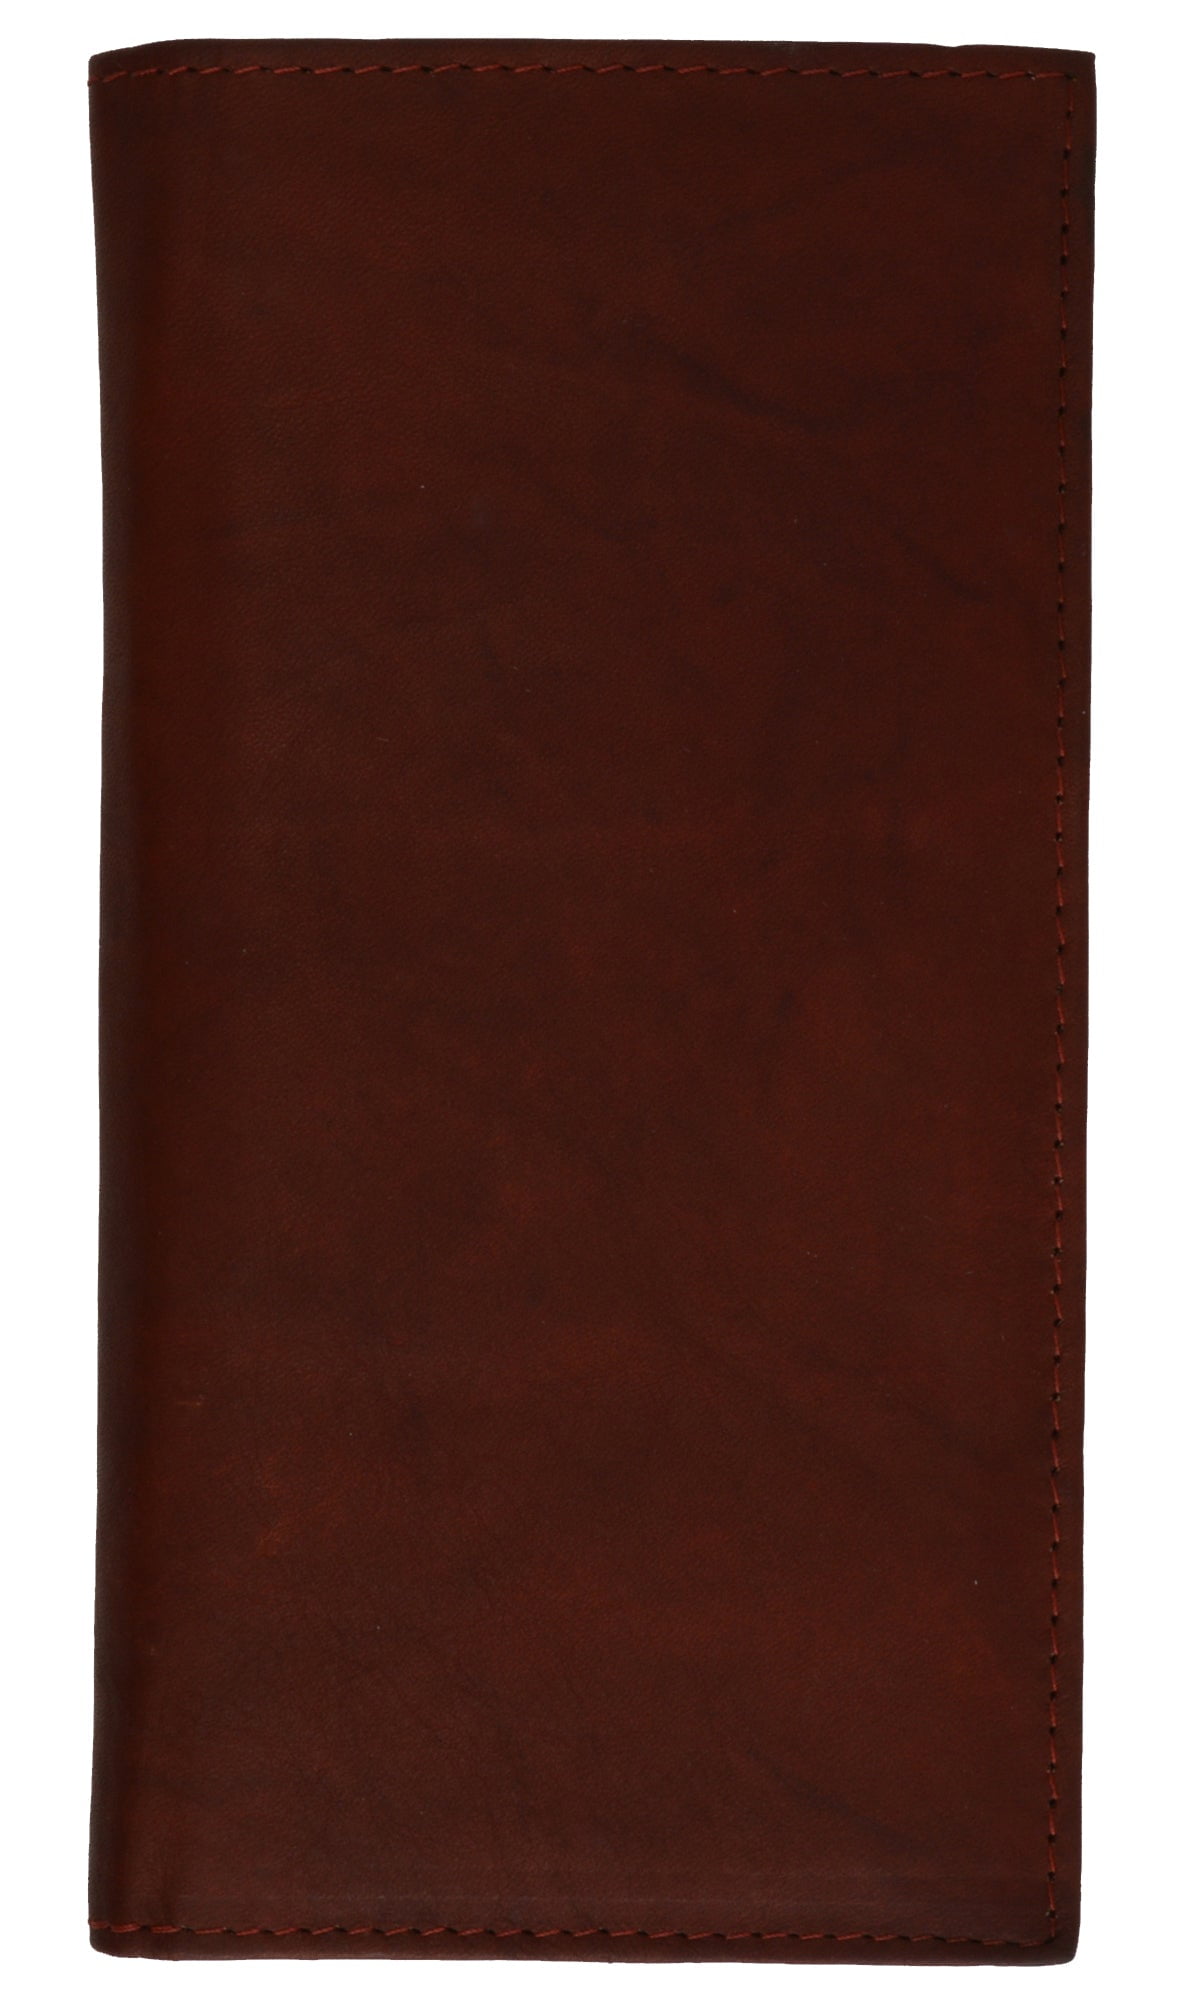 New Design!!! 100% Genuine Leather-Checkbook cover with divider dark brown 